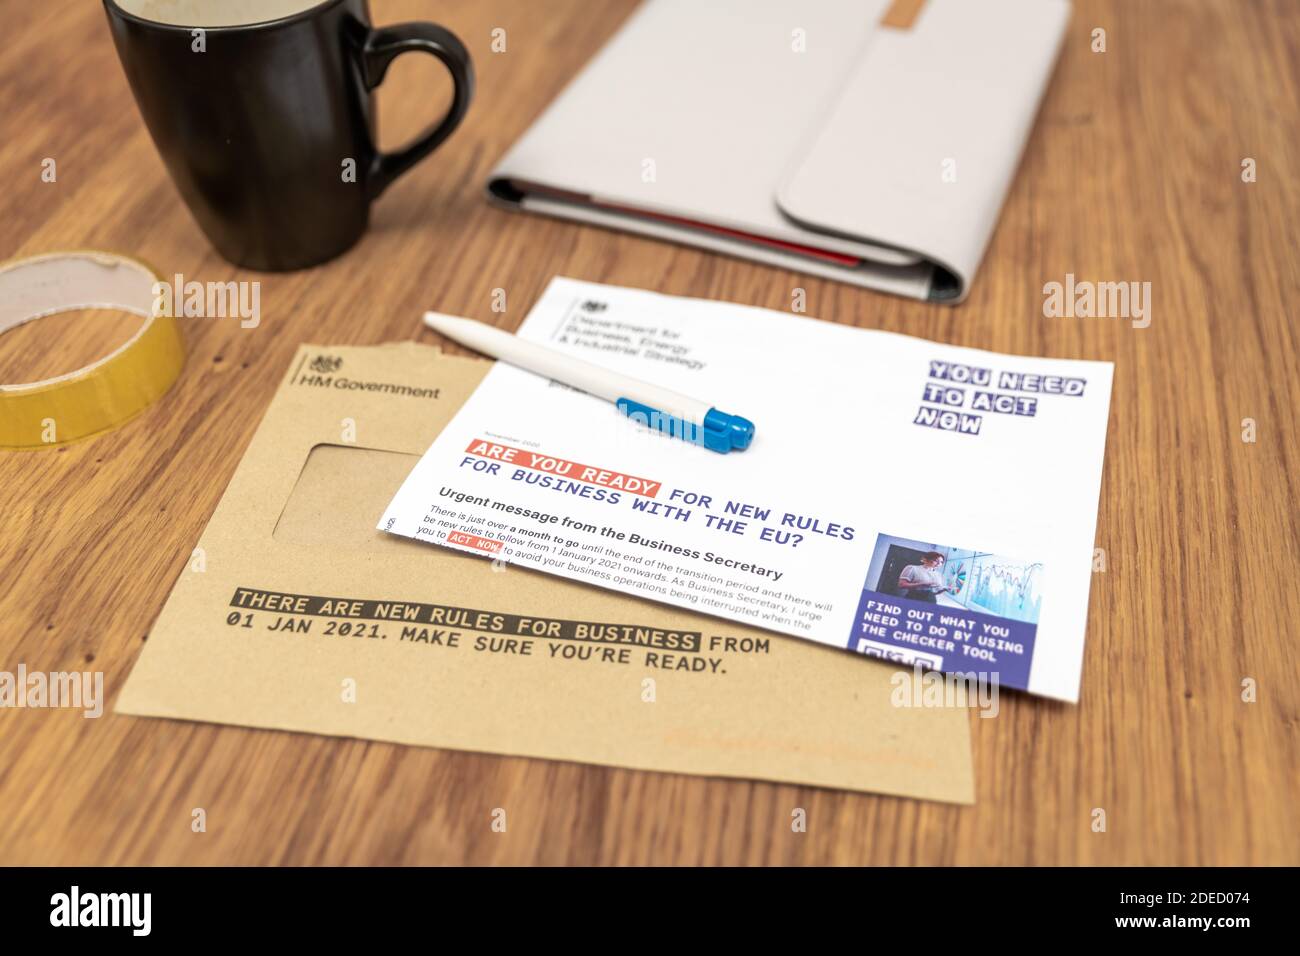 Poole, UK. Monday 30 November 2020. The UK governemnt sends a letter to all businesses regarding Brexit and the changes in the law. Letter signed by Rt Hon Alok Sharma MP, Secretary of State for Business. Credit: Thomas Faull/Alamy Live News Stock Photo